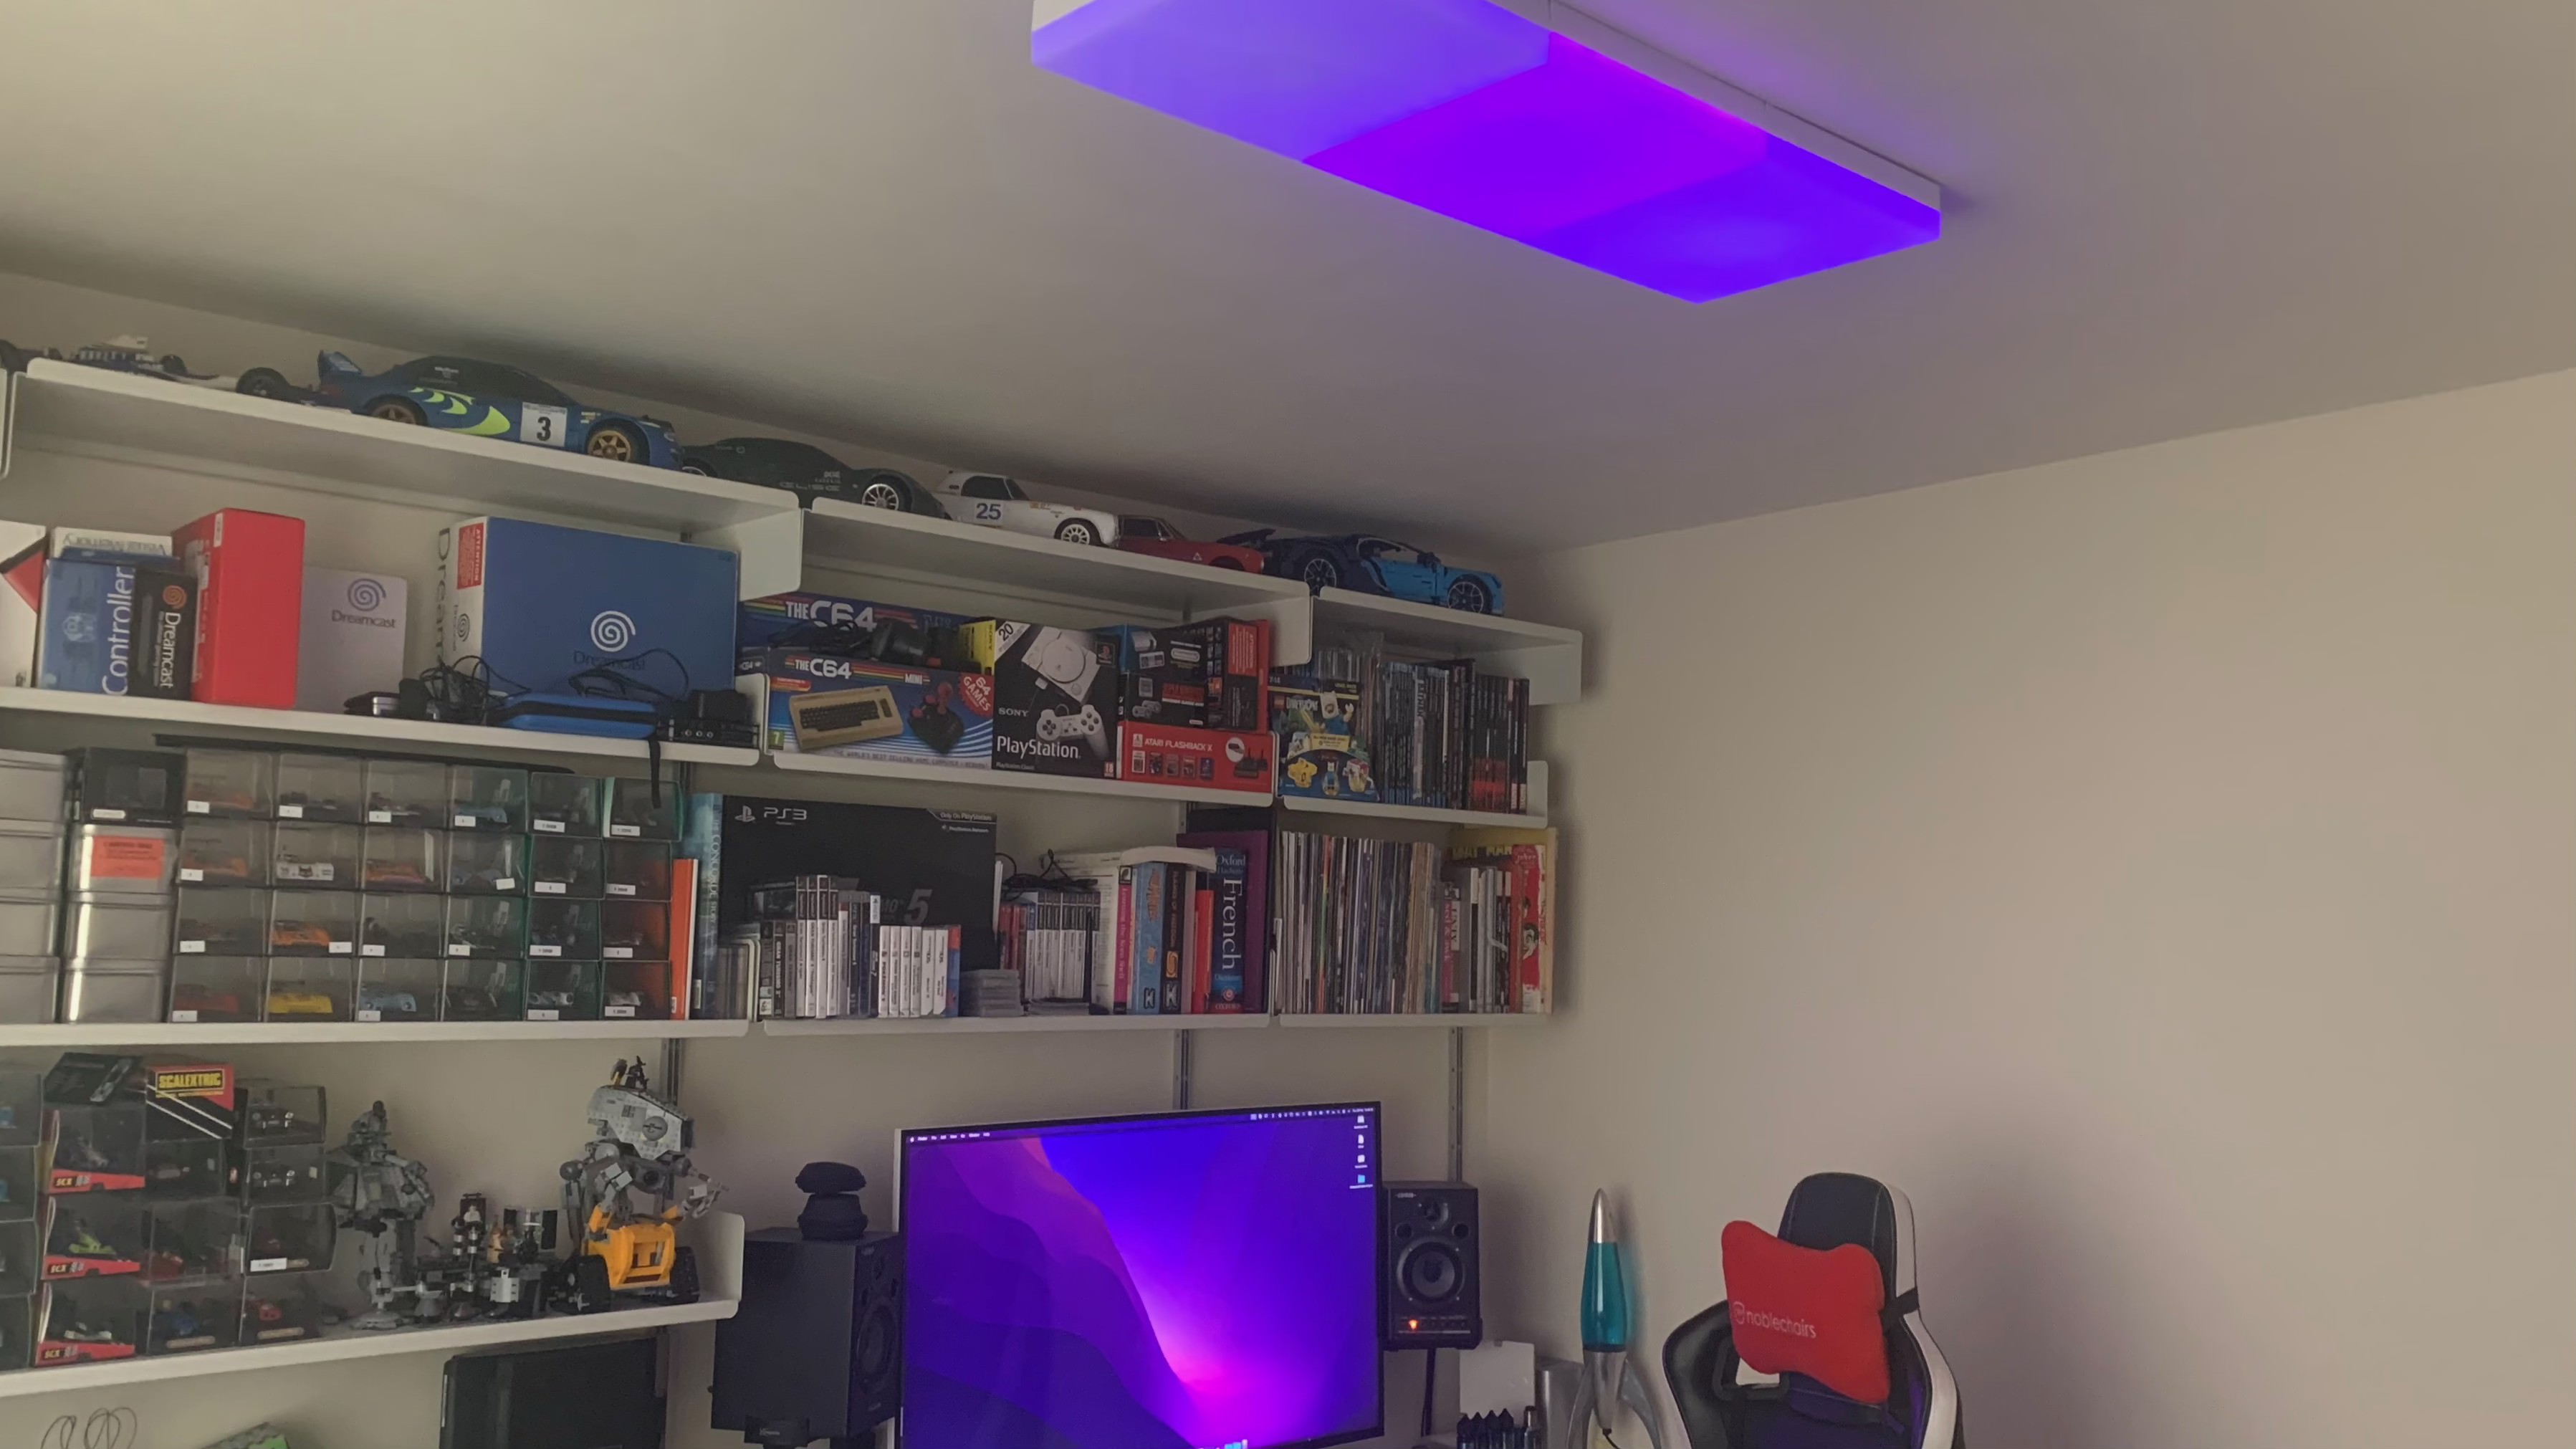 Nanoleaf Skylight mounted on the ceiling